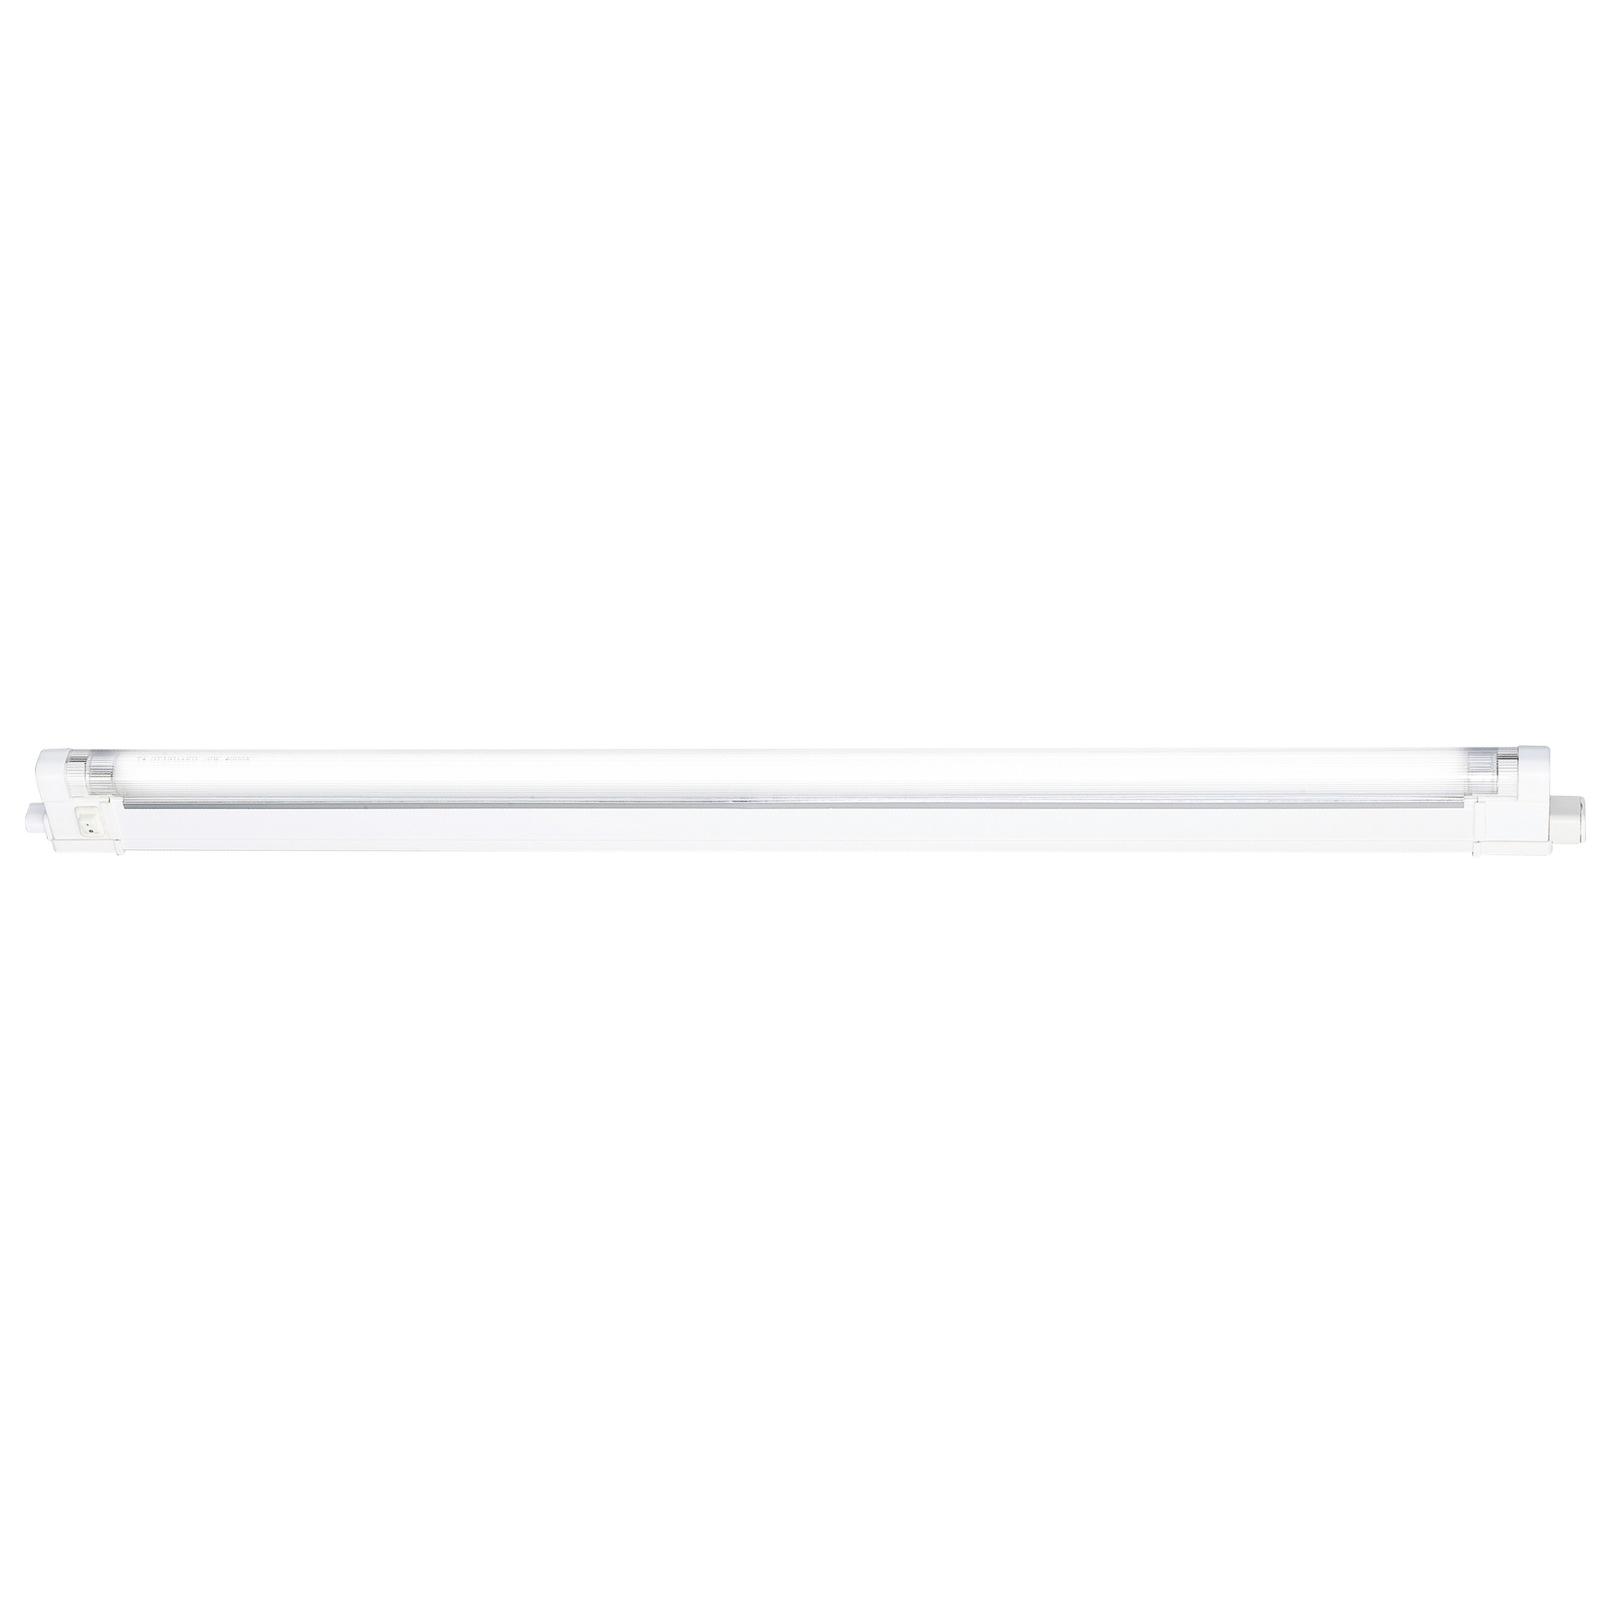 IP20 16W T4 Fluorescent Fitting With Tube, Switch And Diffuser 4000K - T416 